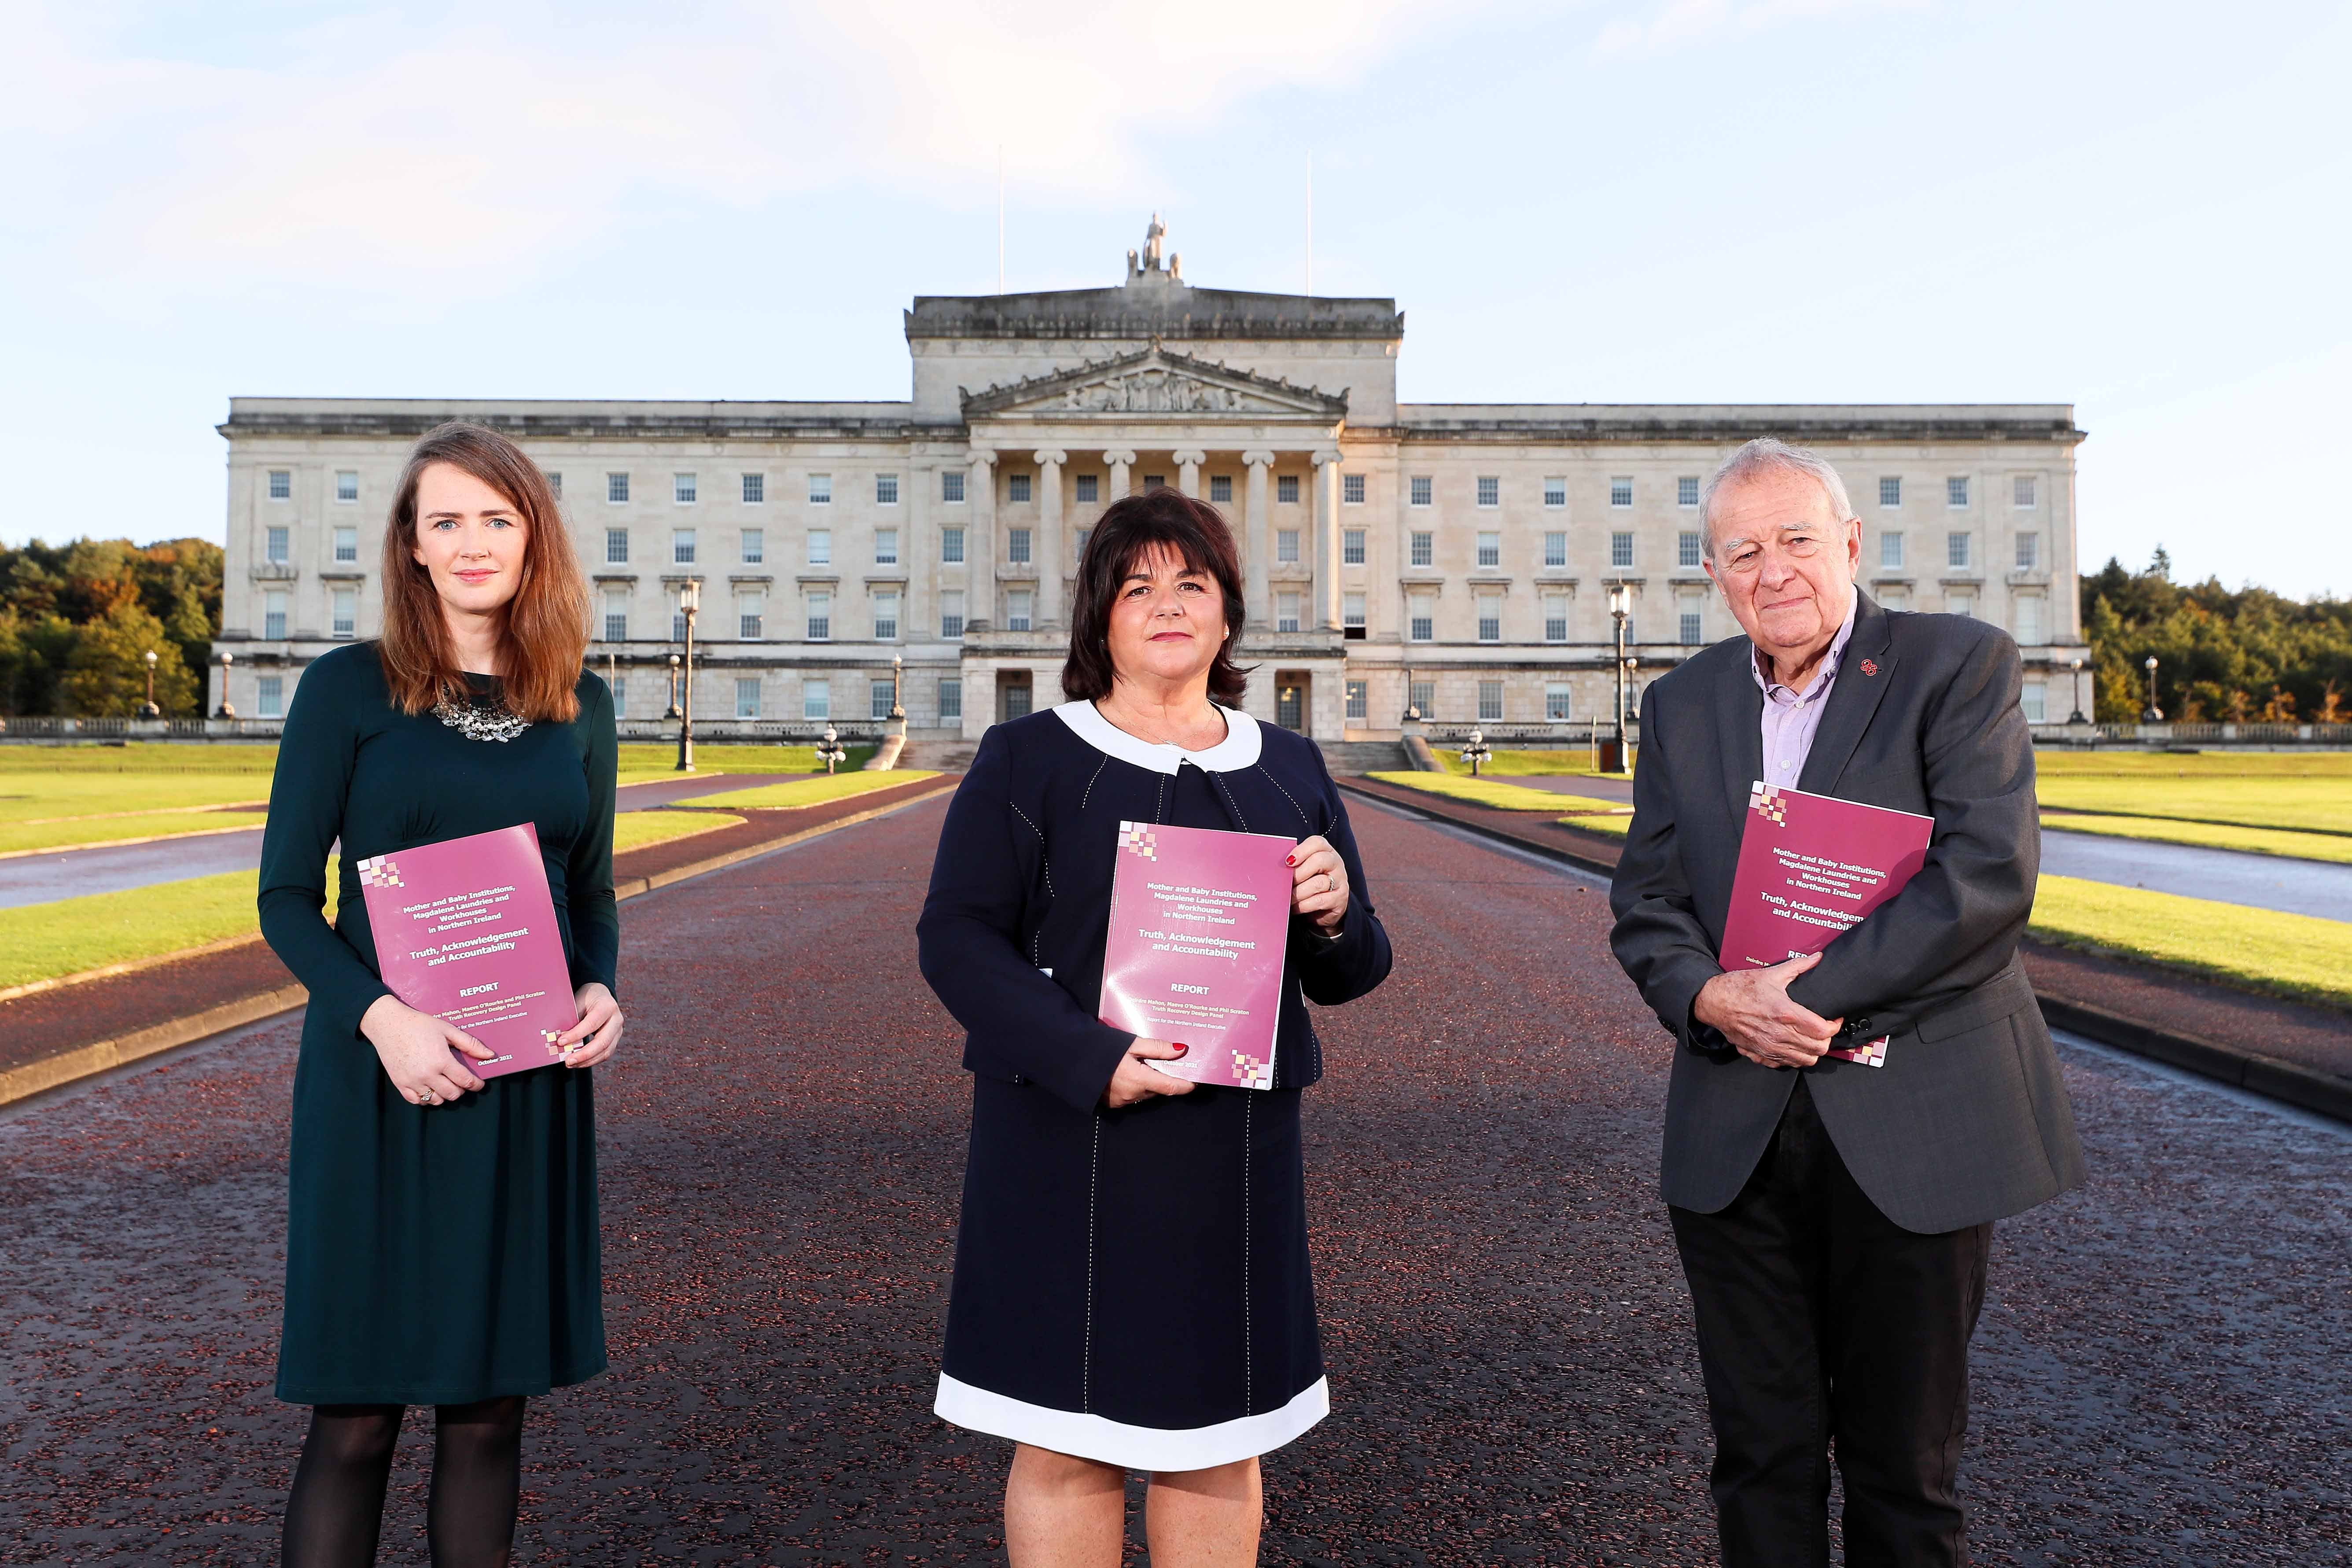 The Truth Recovery Design Panel of Dr Maeve O’Rourke, Deirdre Mahon (Chair) and Professor Phil Scraton outside Stormont, at the official launch of Truth Recovery Design Panel Report last year (PA)